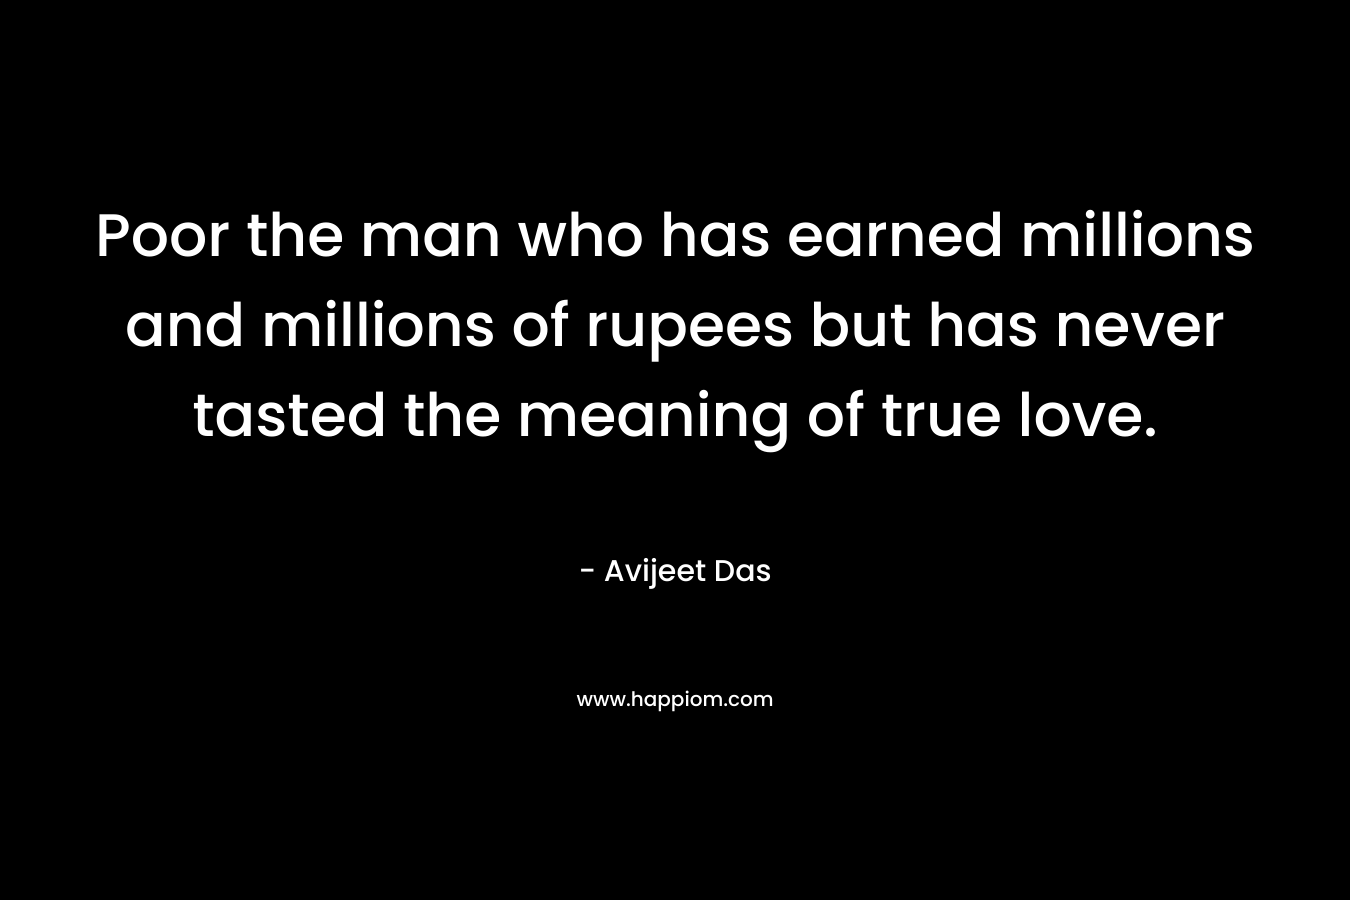 Poor the man who has earned millions and millions of rupees but has never tasted the meaning of true love.